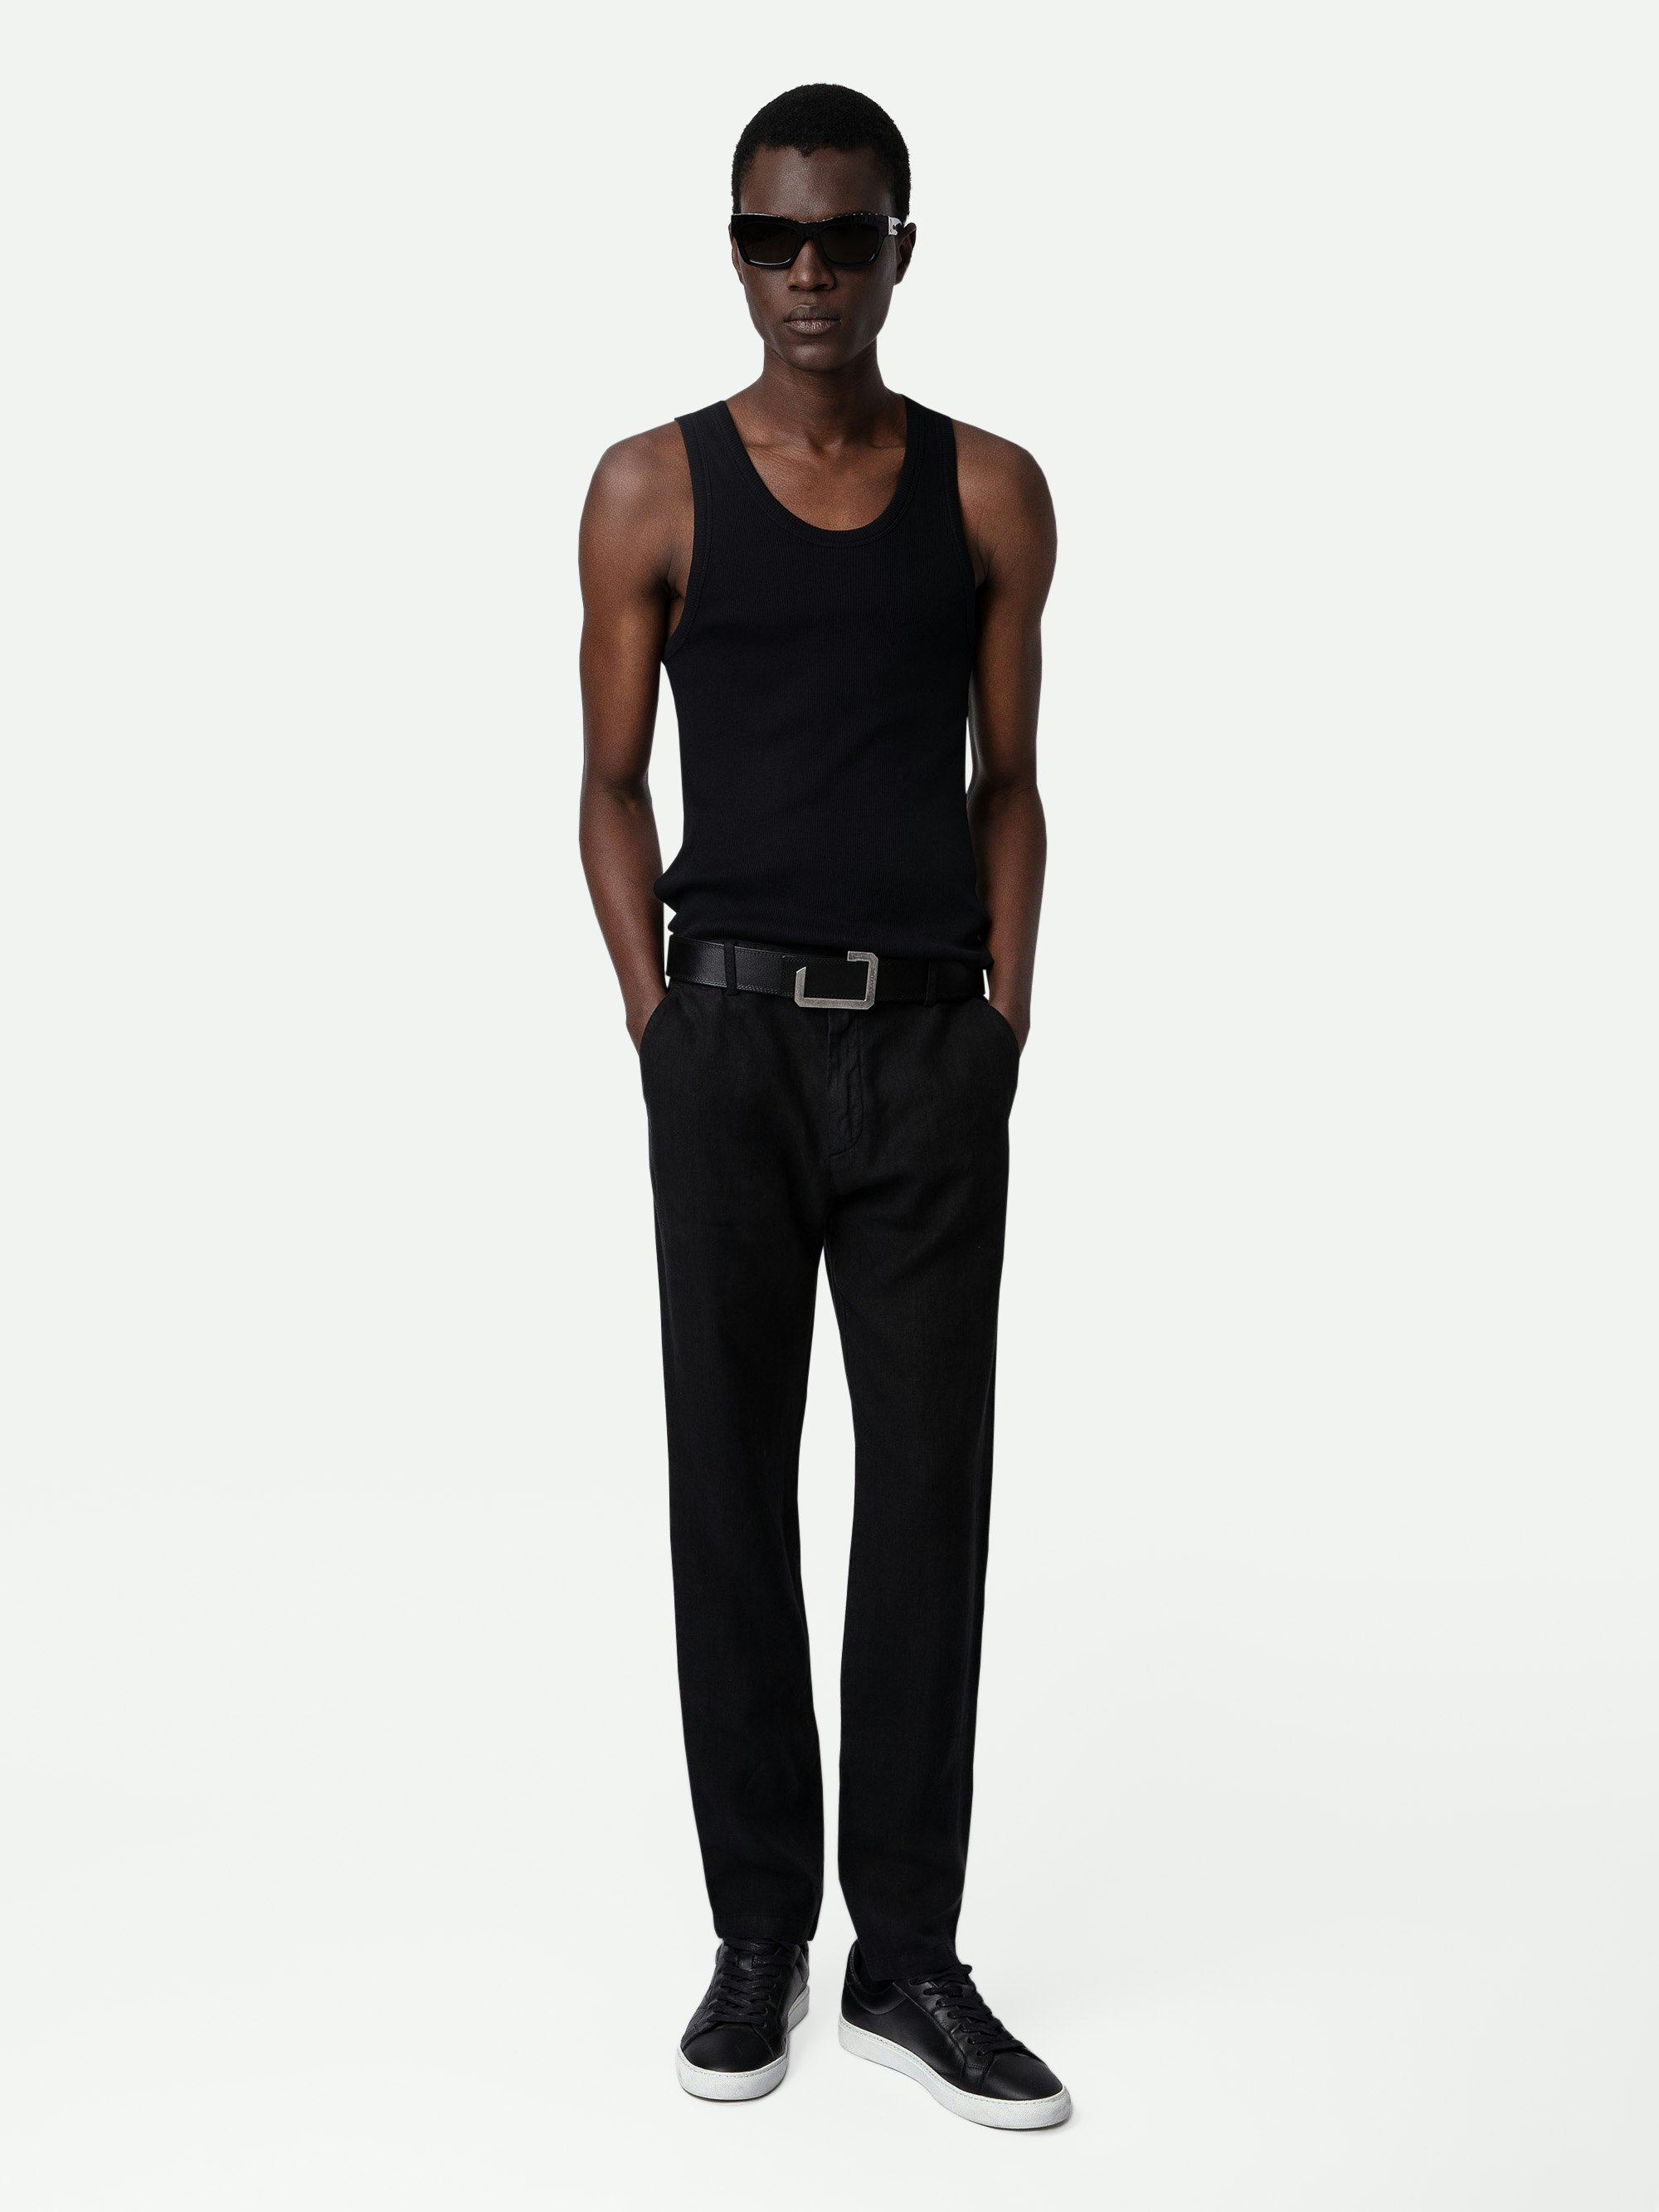 Pierce Linen Trousers - Black washed linen trousers with pockets.